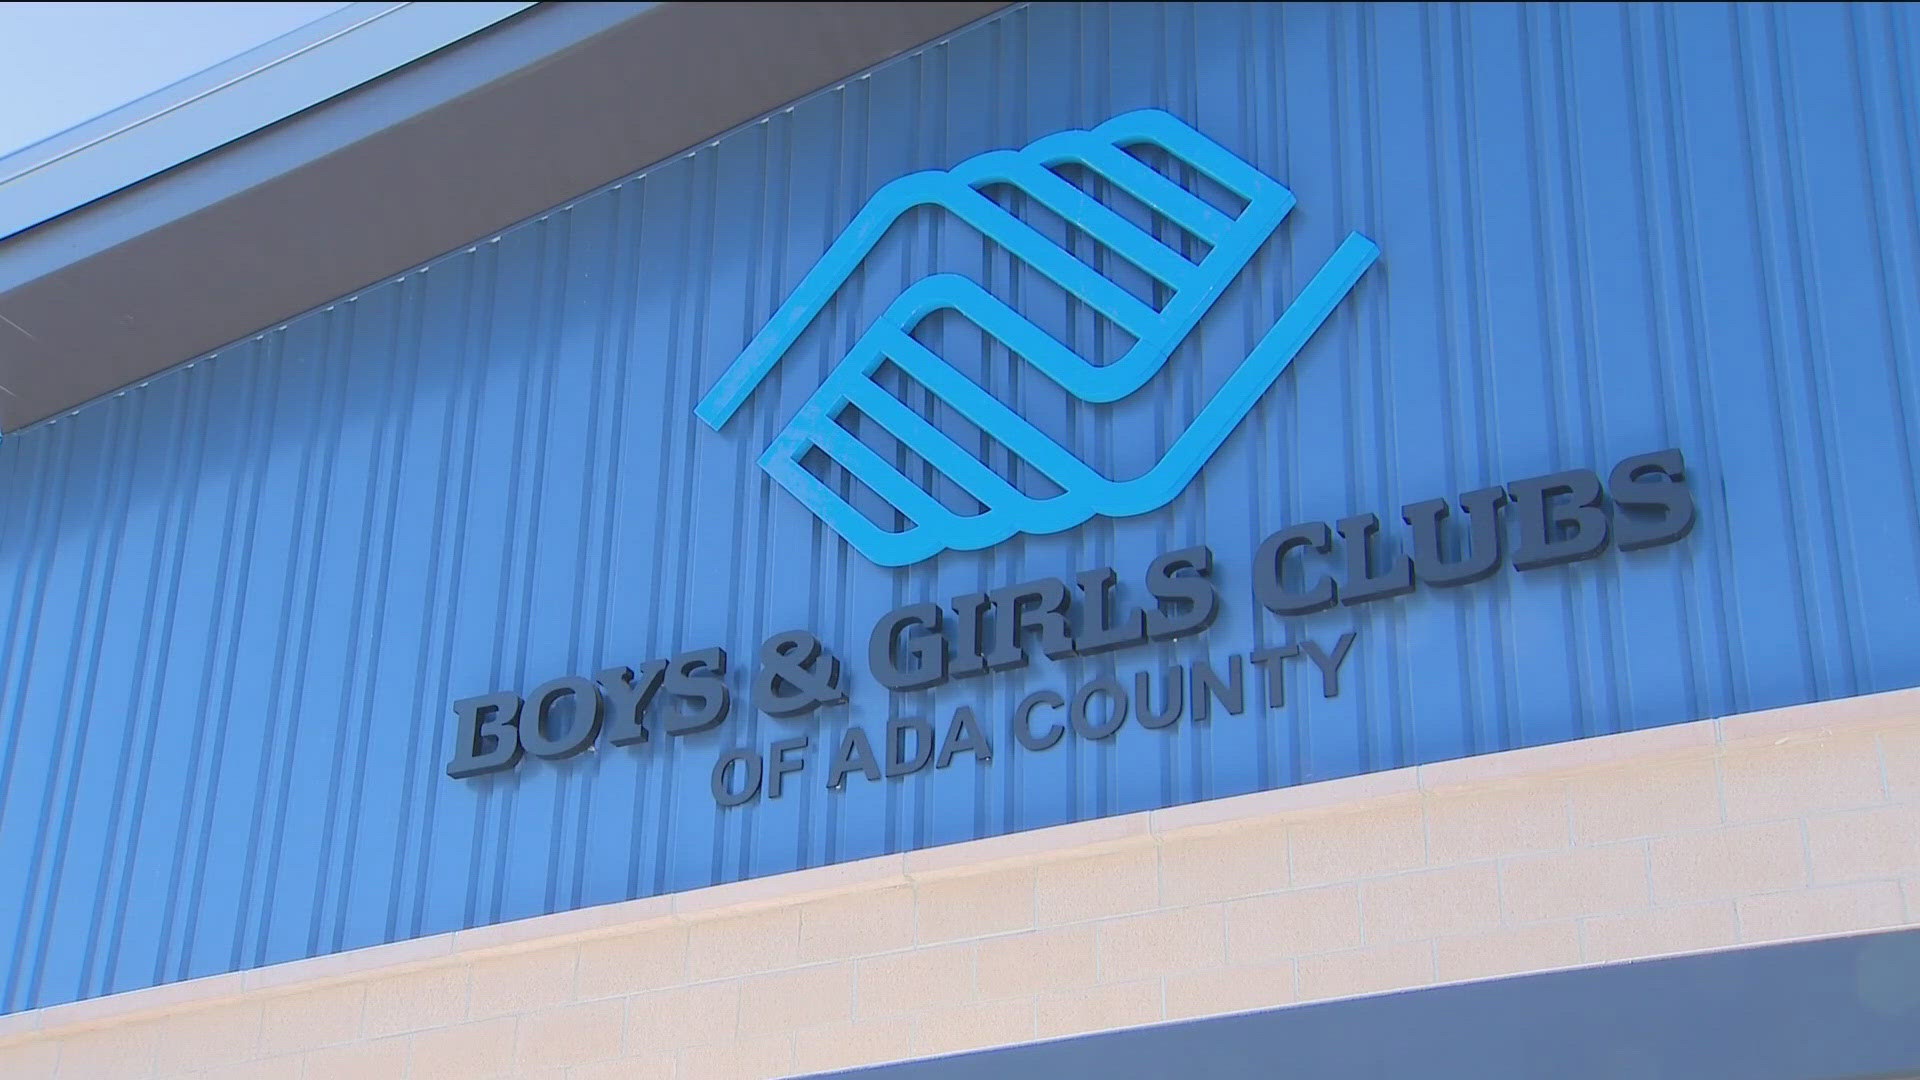 Kuna is getting a new Boys and Girls Club.